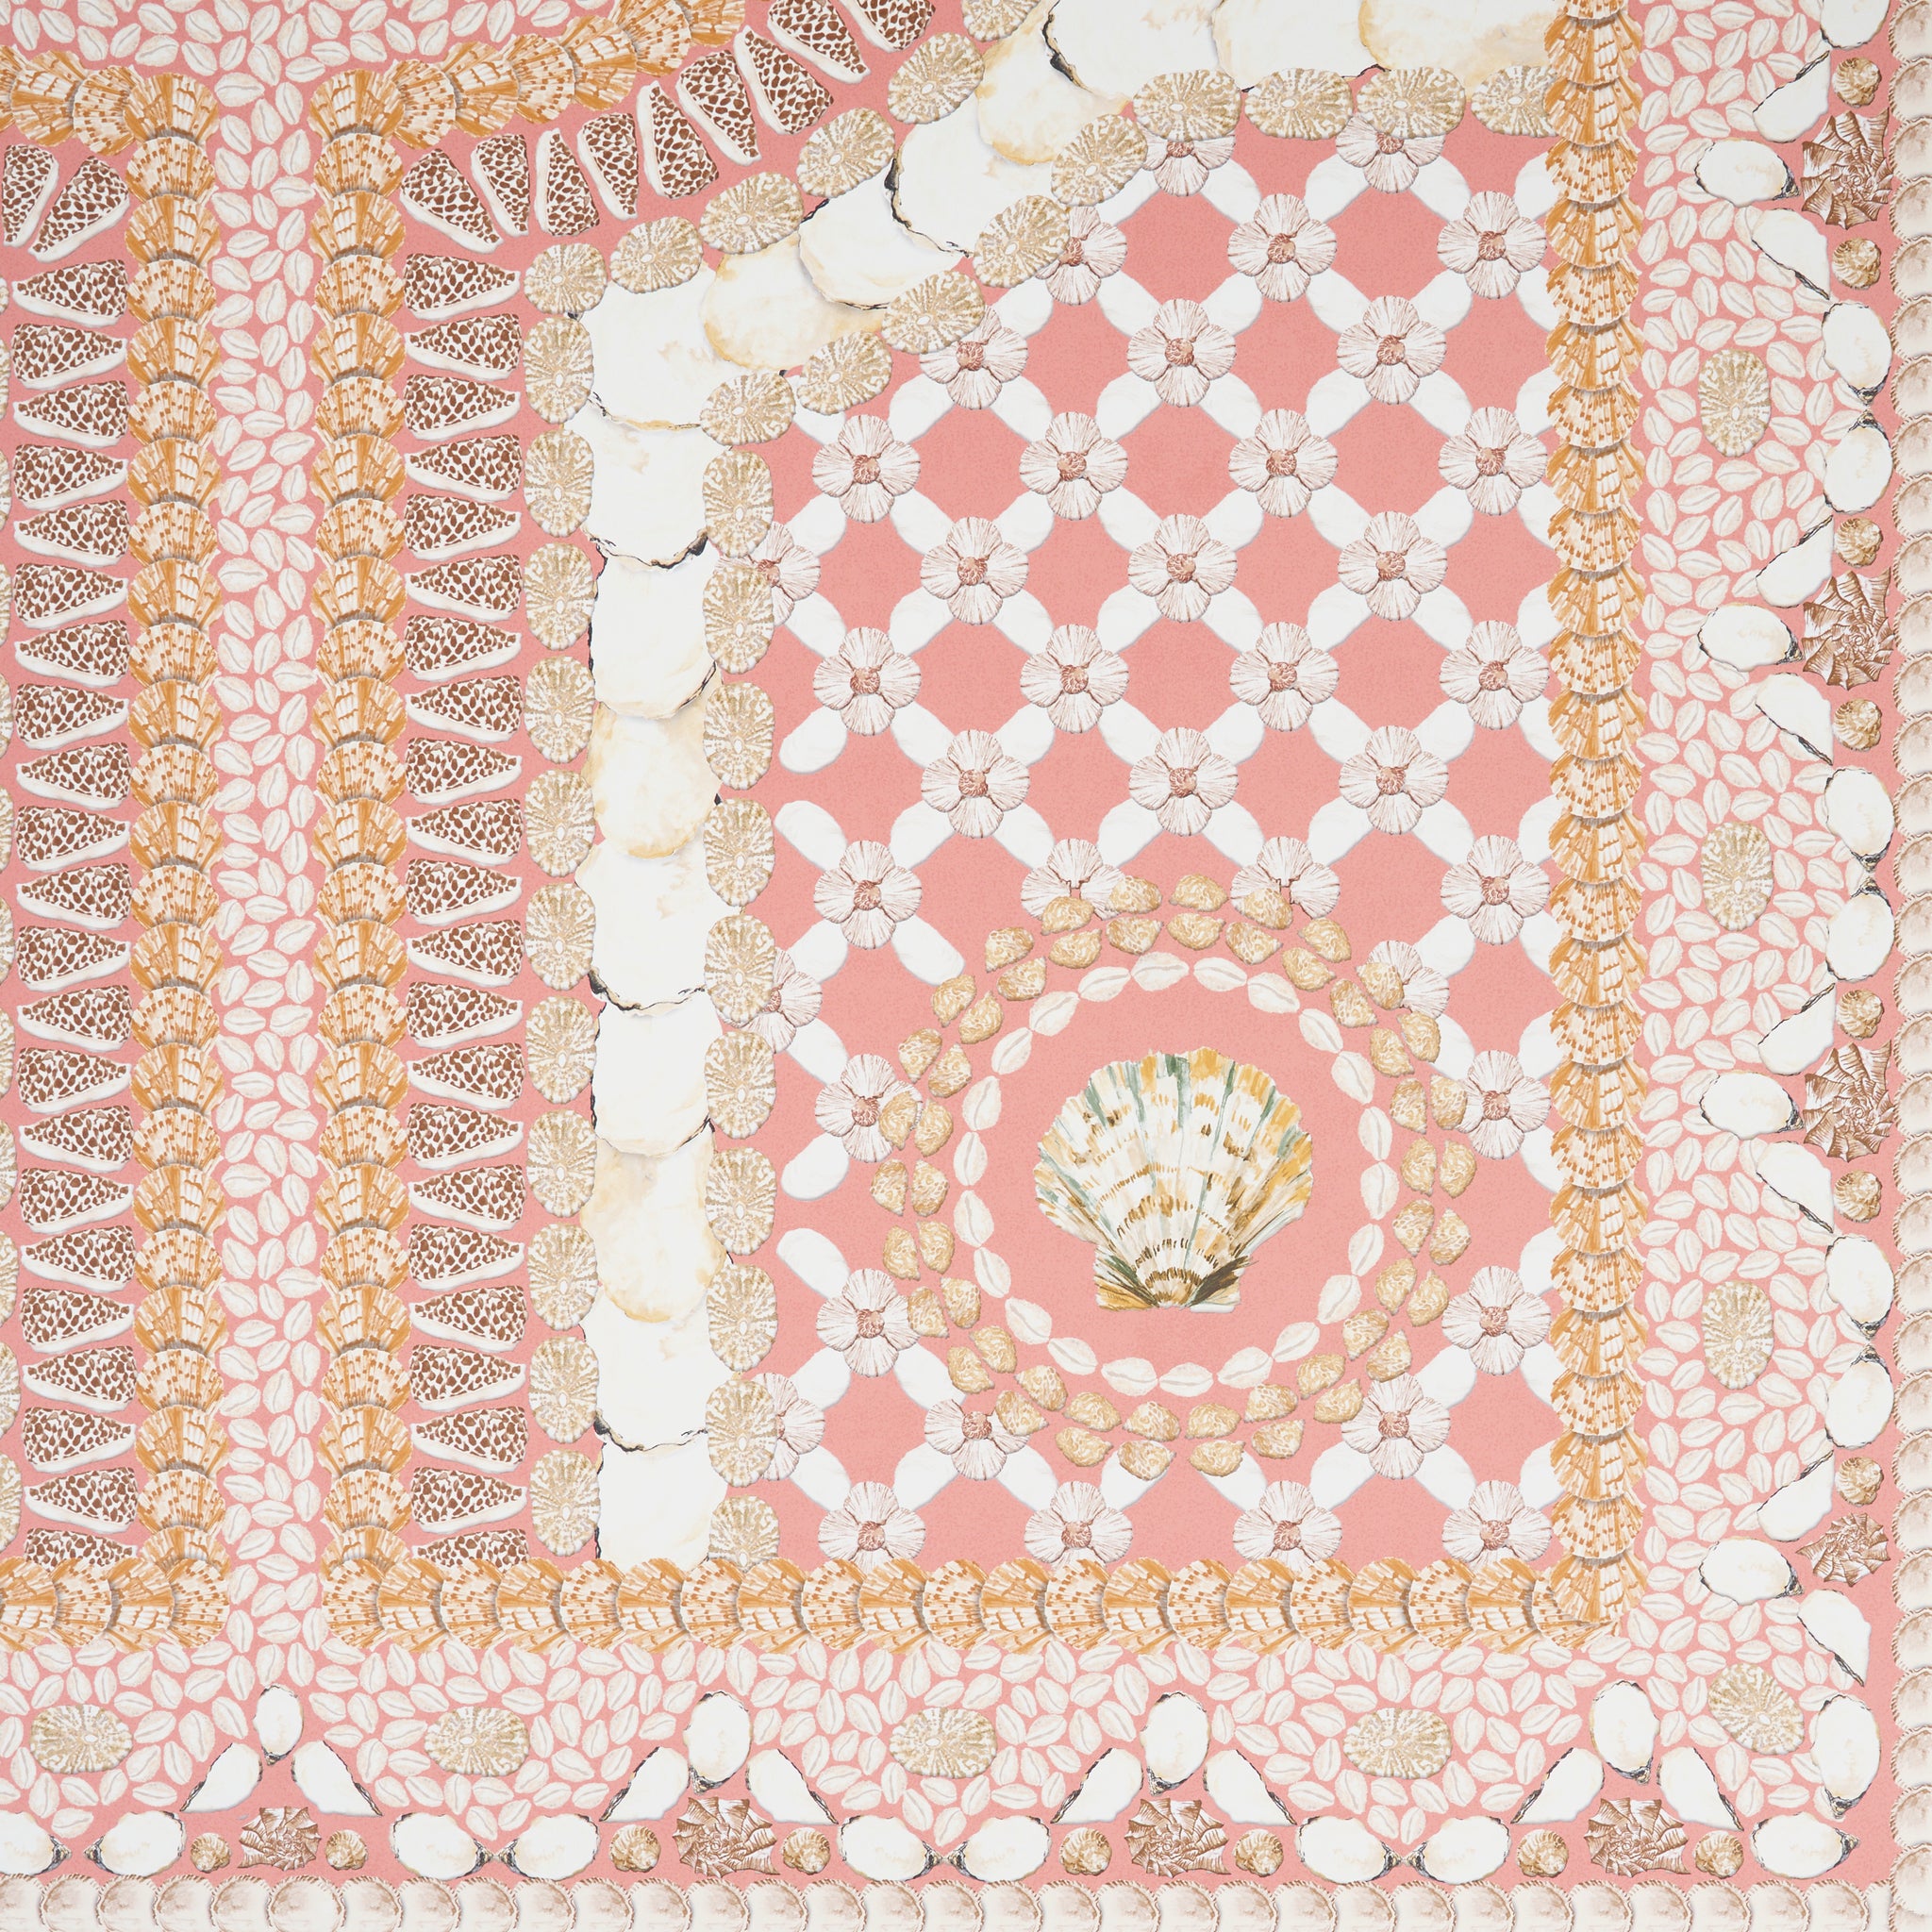 SHELL GROTTO PANEL A | CORAL